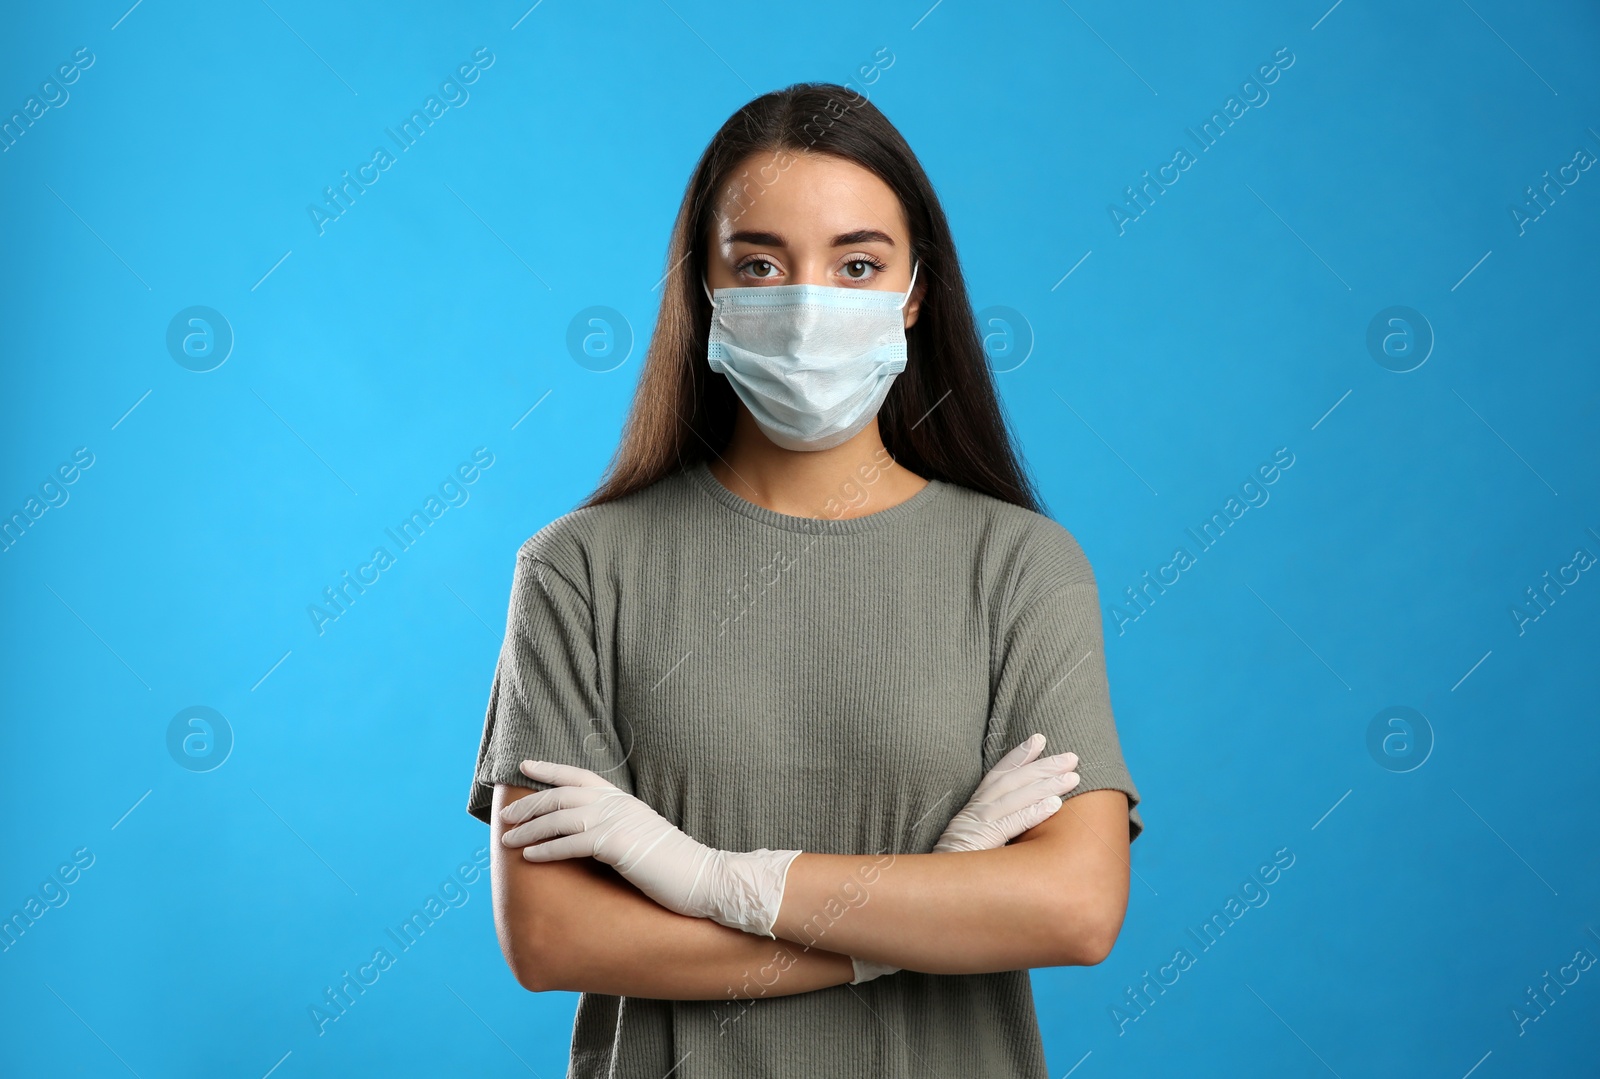 Photo of Woman wearing protective face mask and medical gloves on blue background